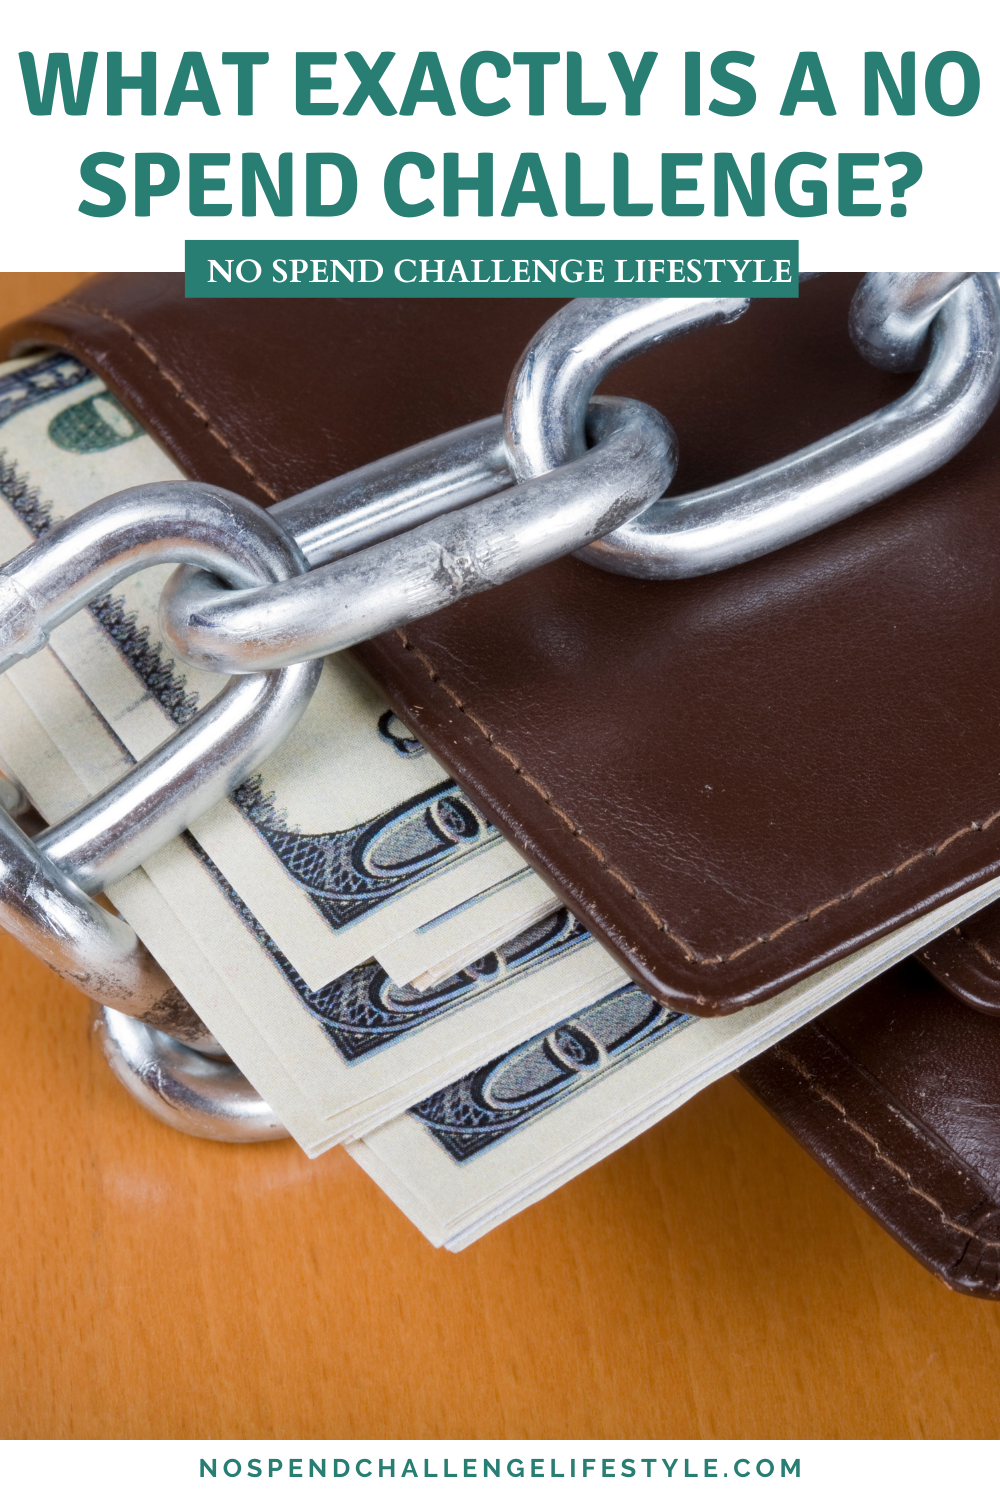 What-exactly-is-a-no-spend-challenge